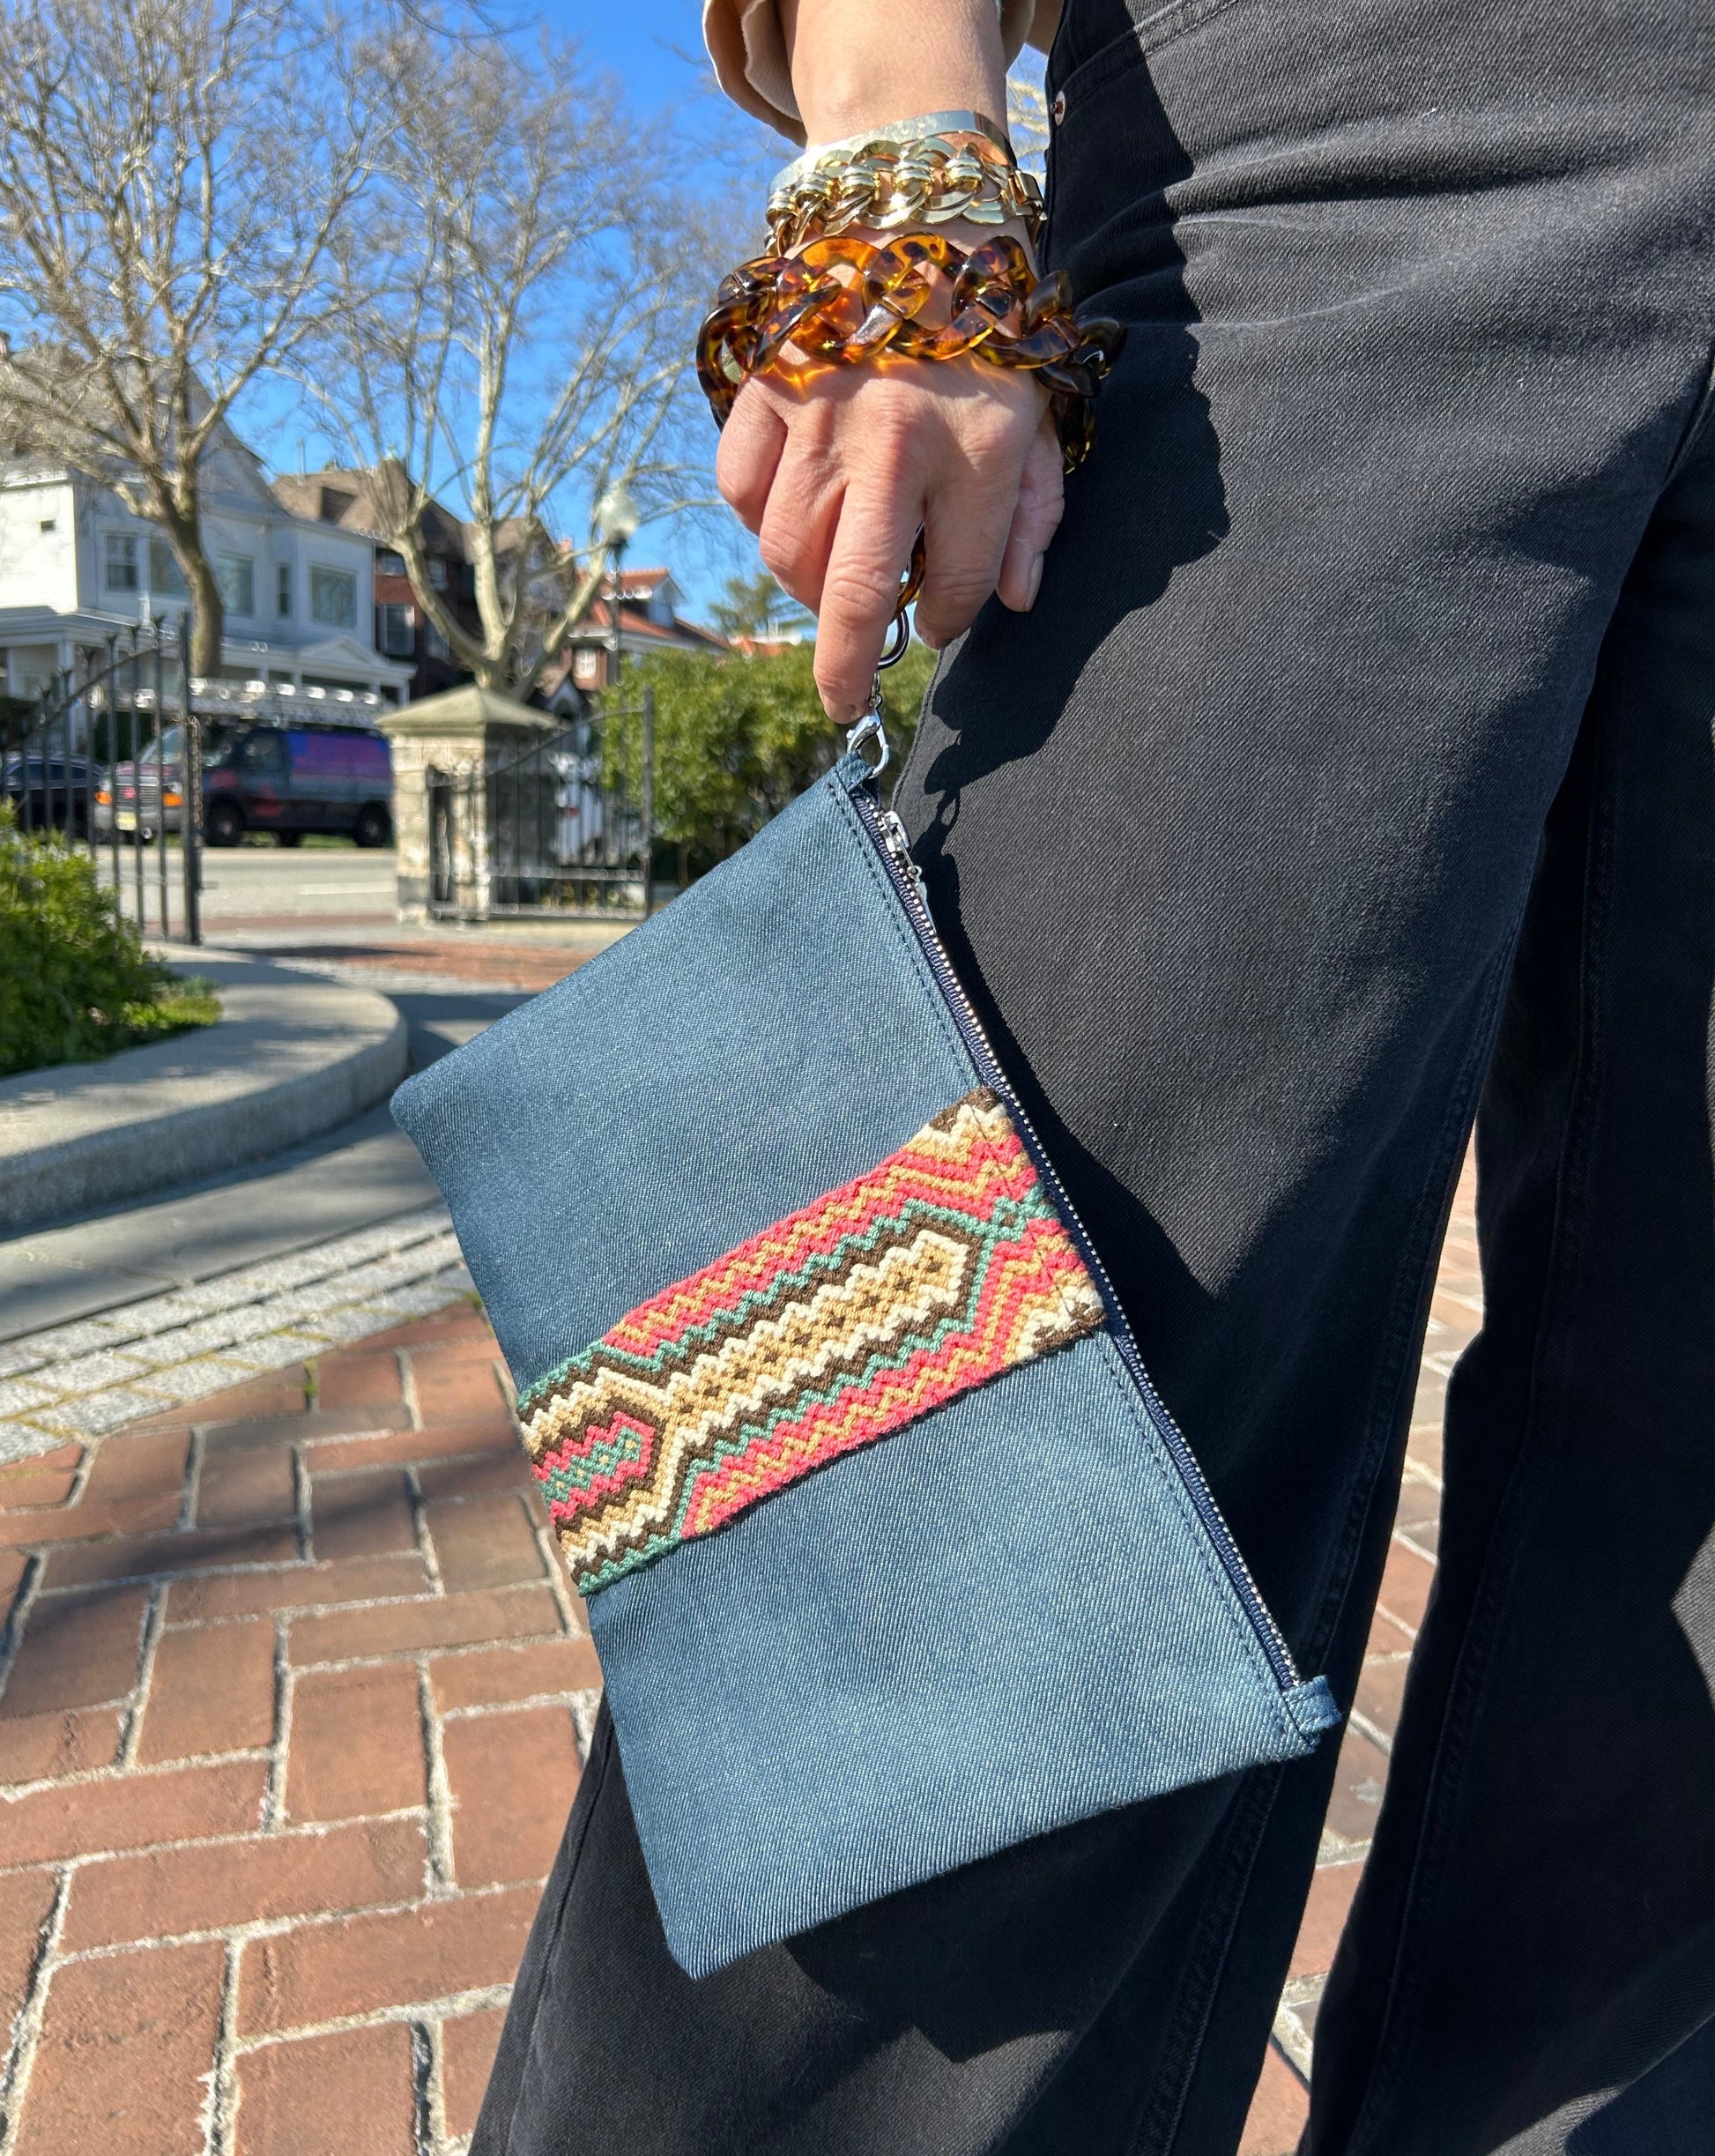 Mina Crossbody bag- the crossbody bag that takes you from work, errands to happy hour!